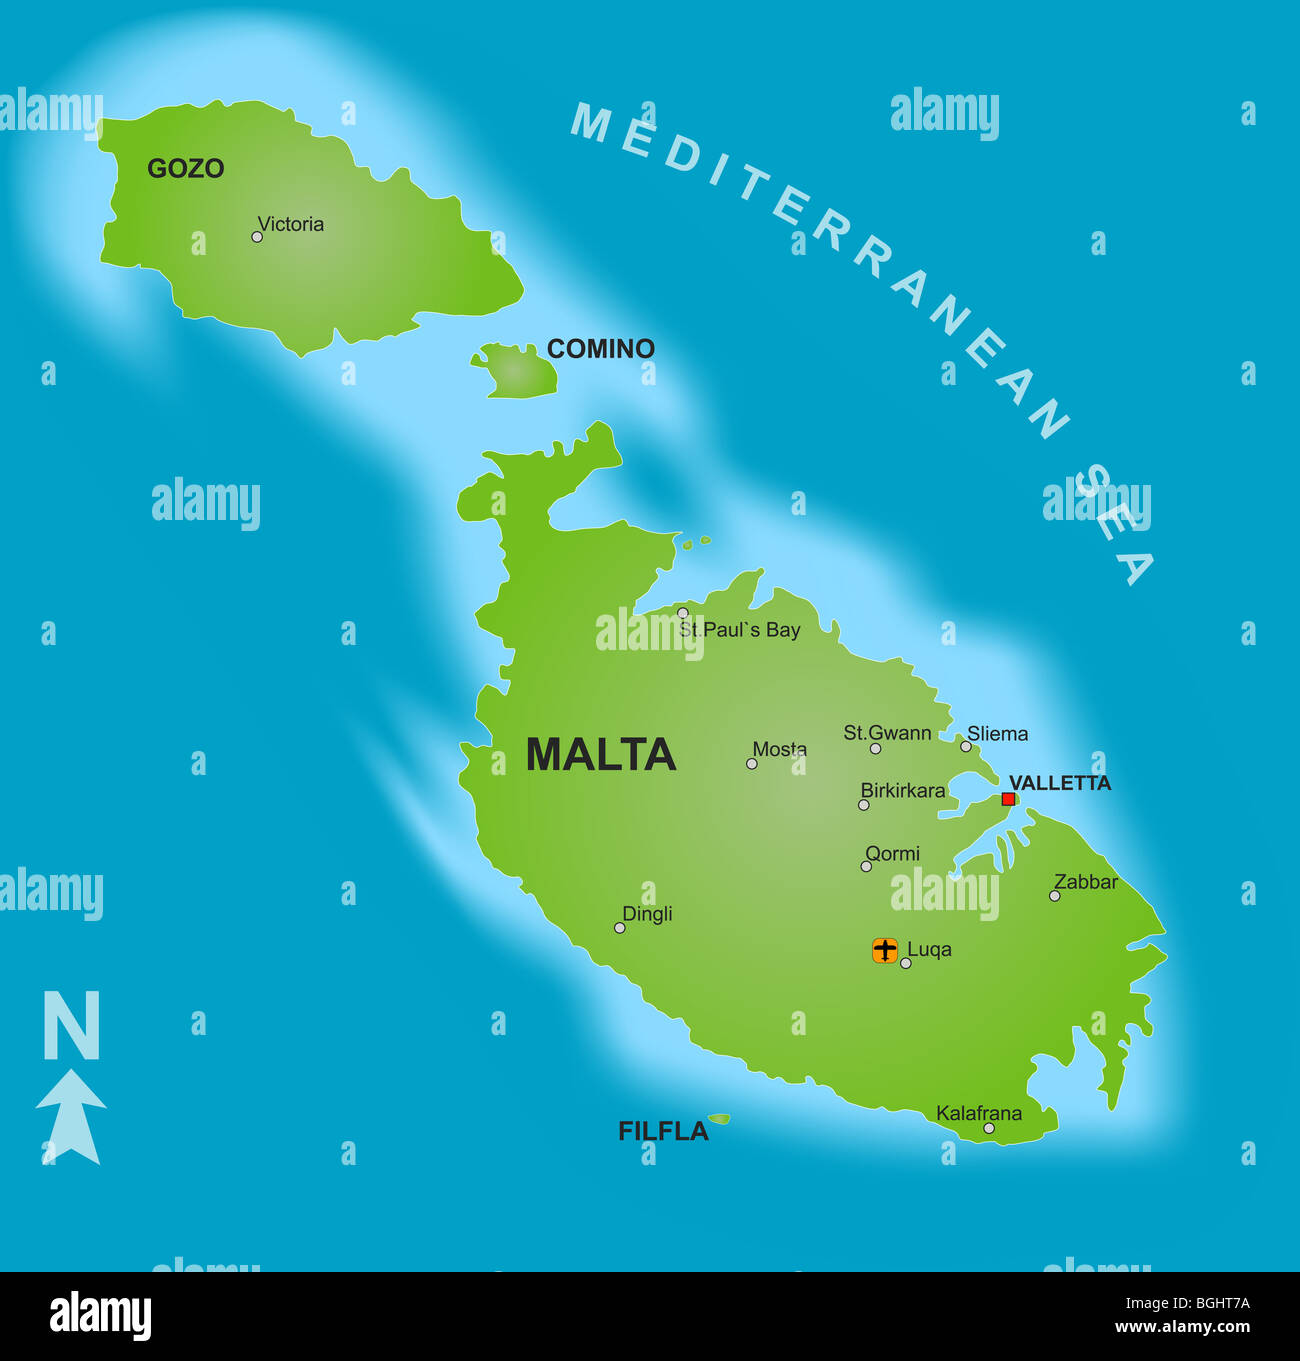 A stylized map of Malta showing the islands and different cities. Stock Photo